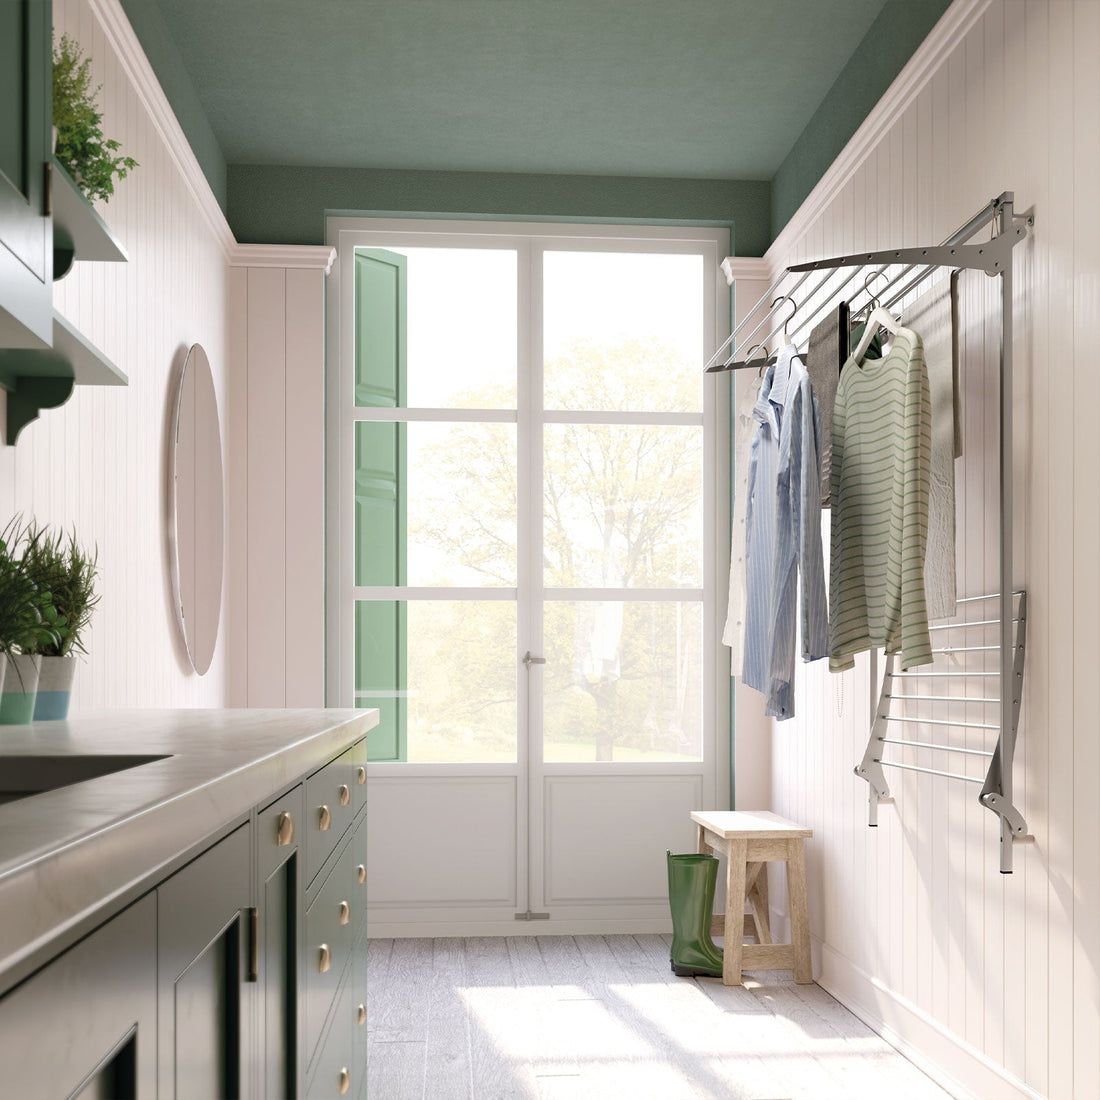 The Benefits of a Wall-Mounted Clothes Drying Rack for Your Laundry Room